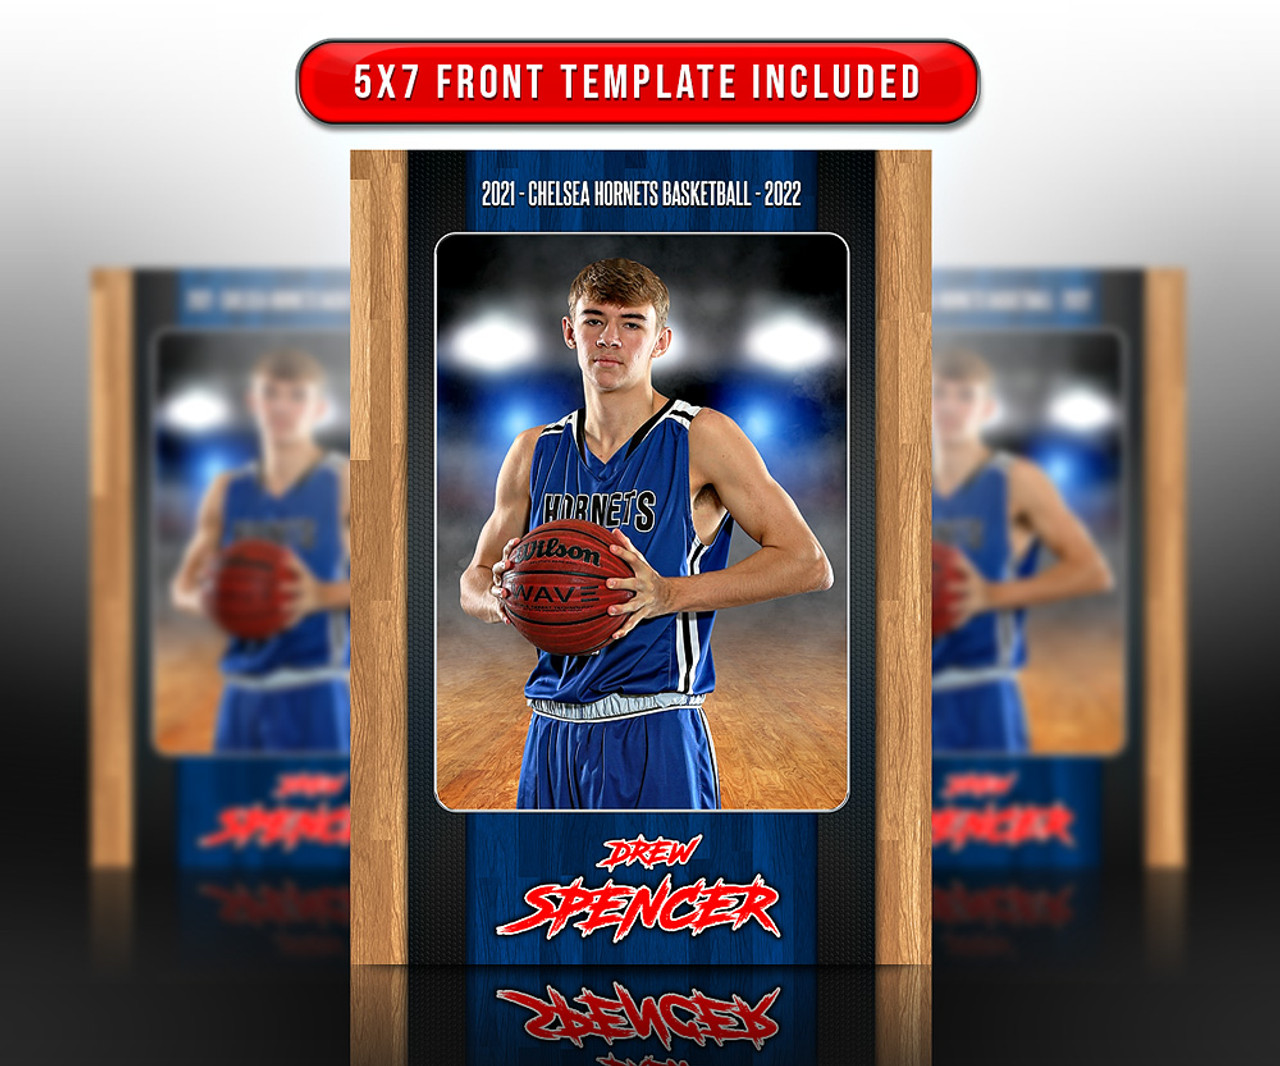 MULTI-SPORT TRADING CARDS AND 5X7 TEMPLATE - HARDWOODS